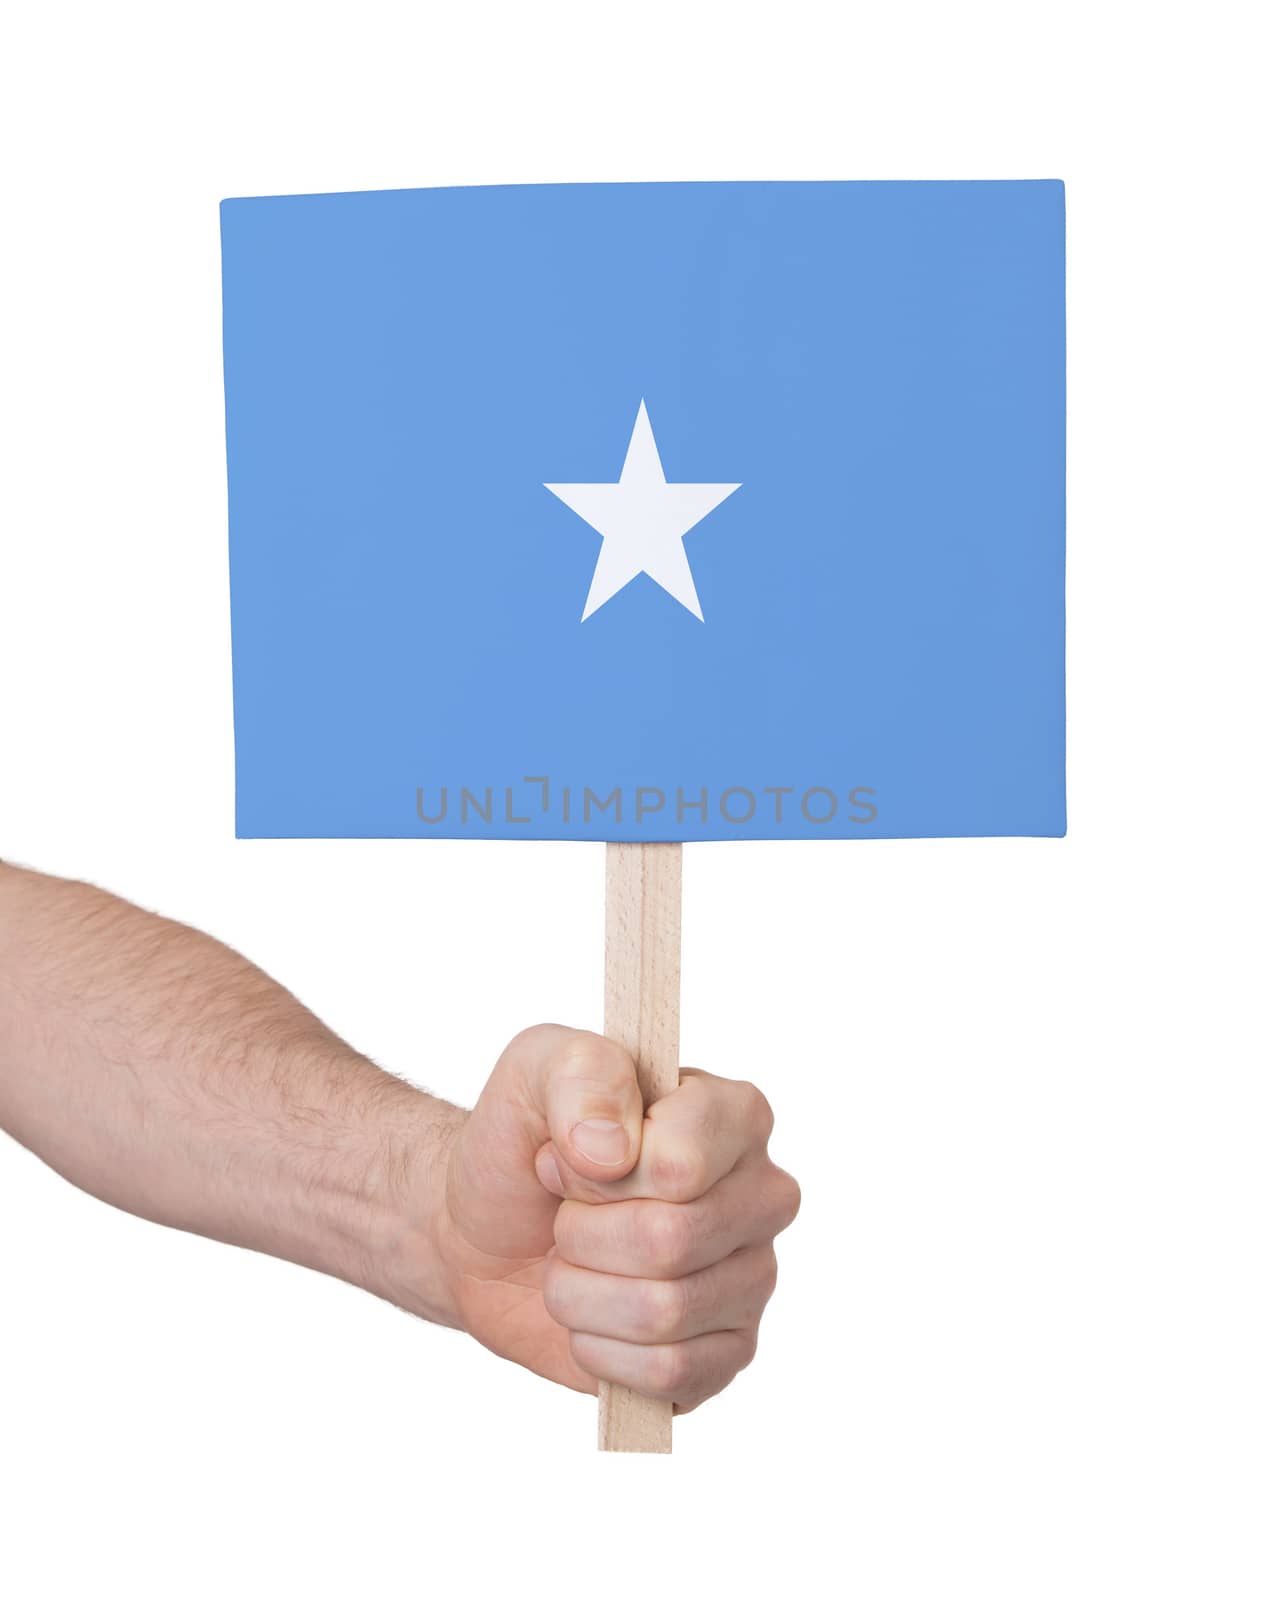 Hand holding small card, isolated on white - Flag of Somalia